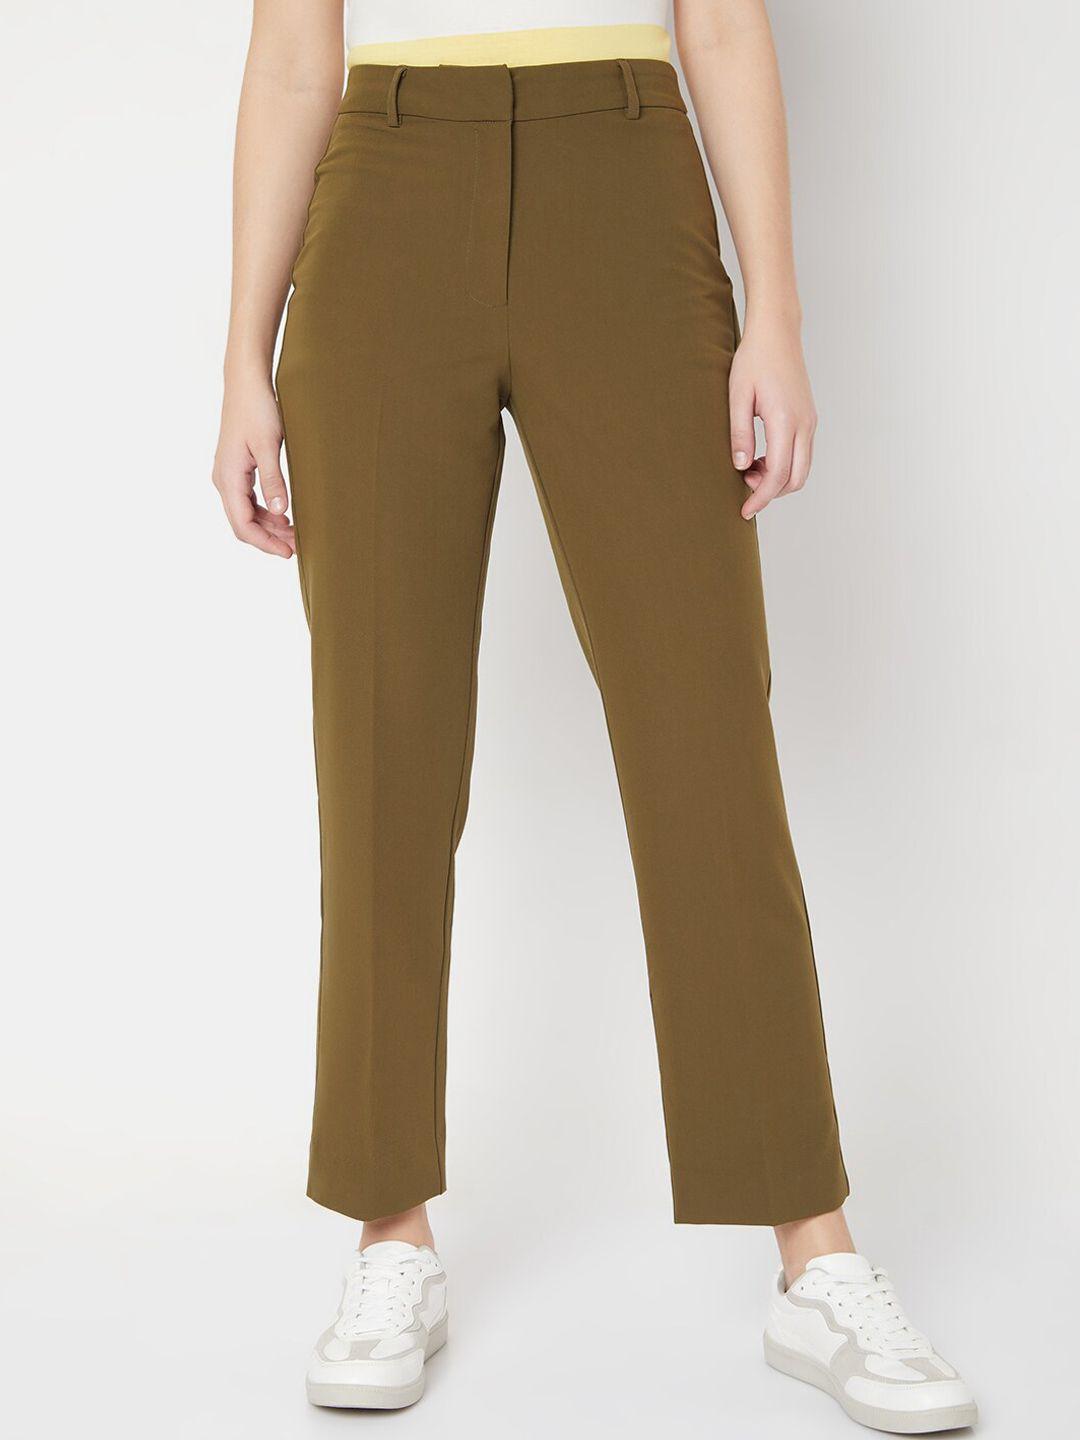 vero moda women olive green straight fit high-rise culottes trousers